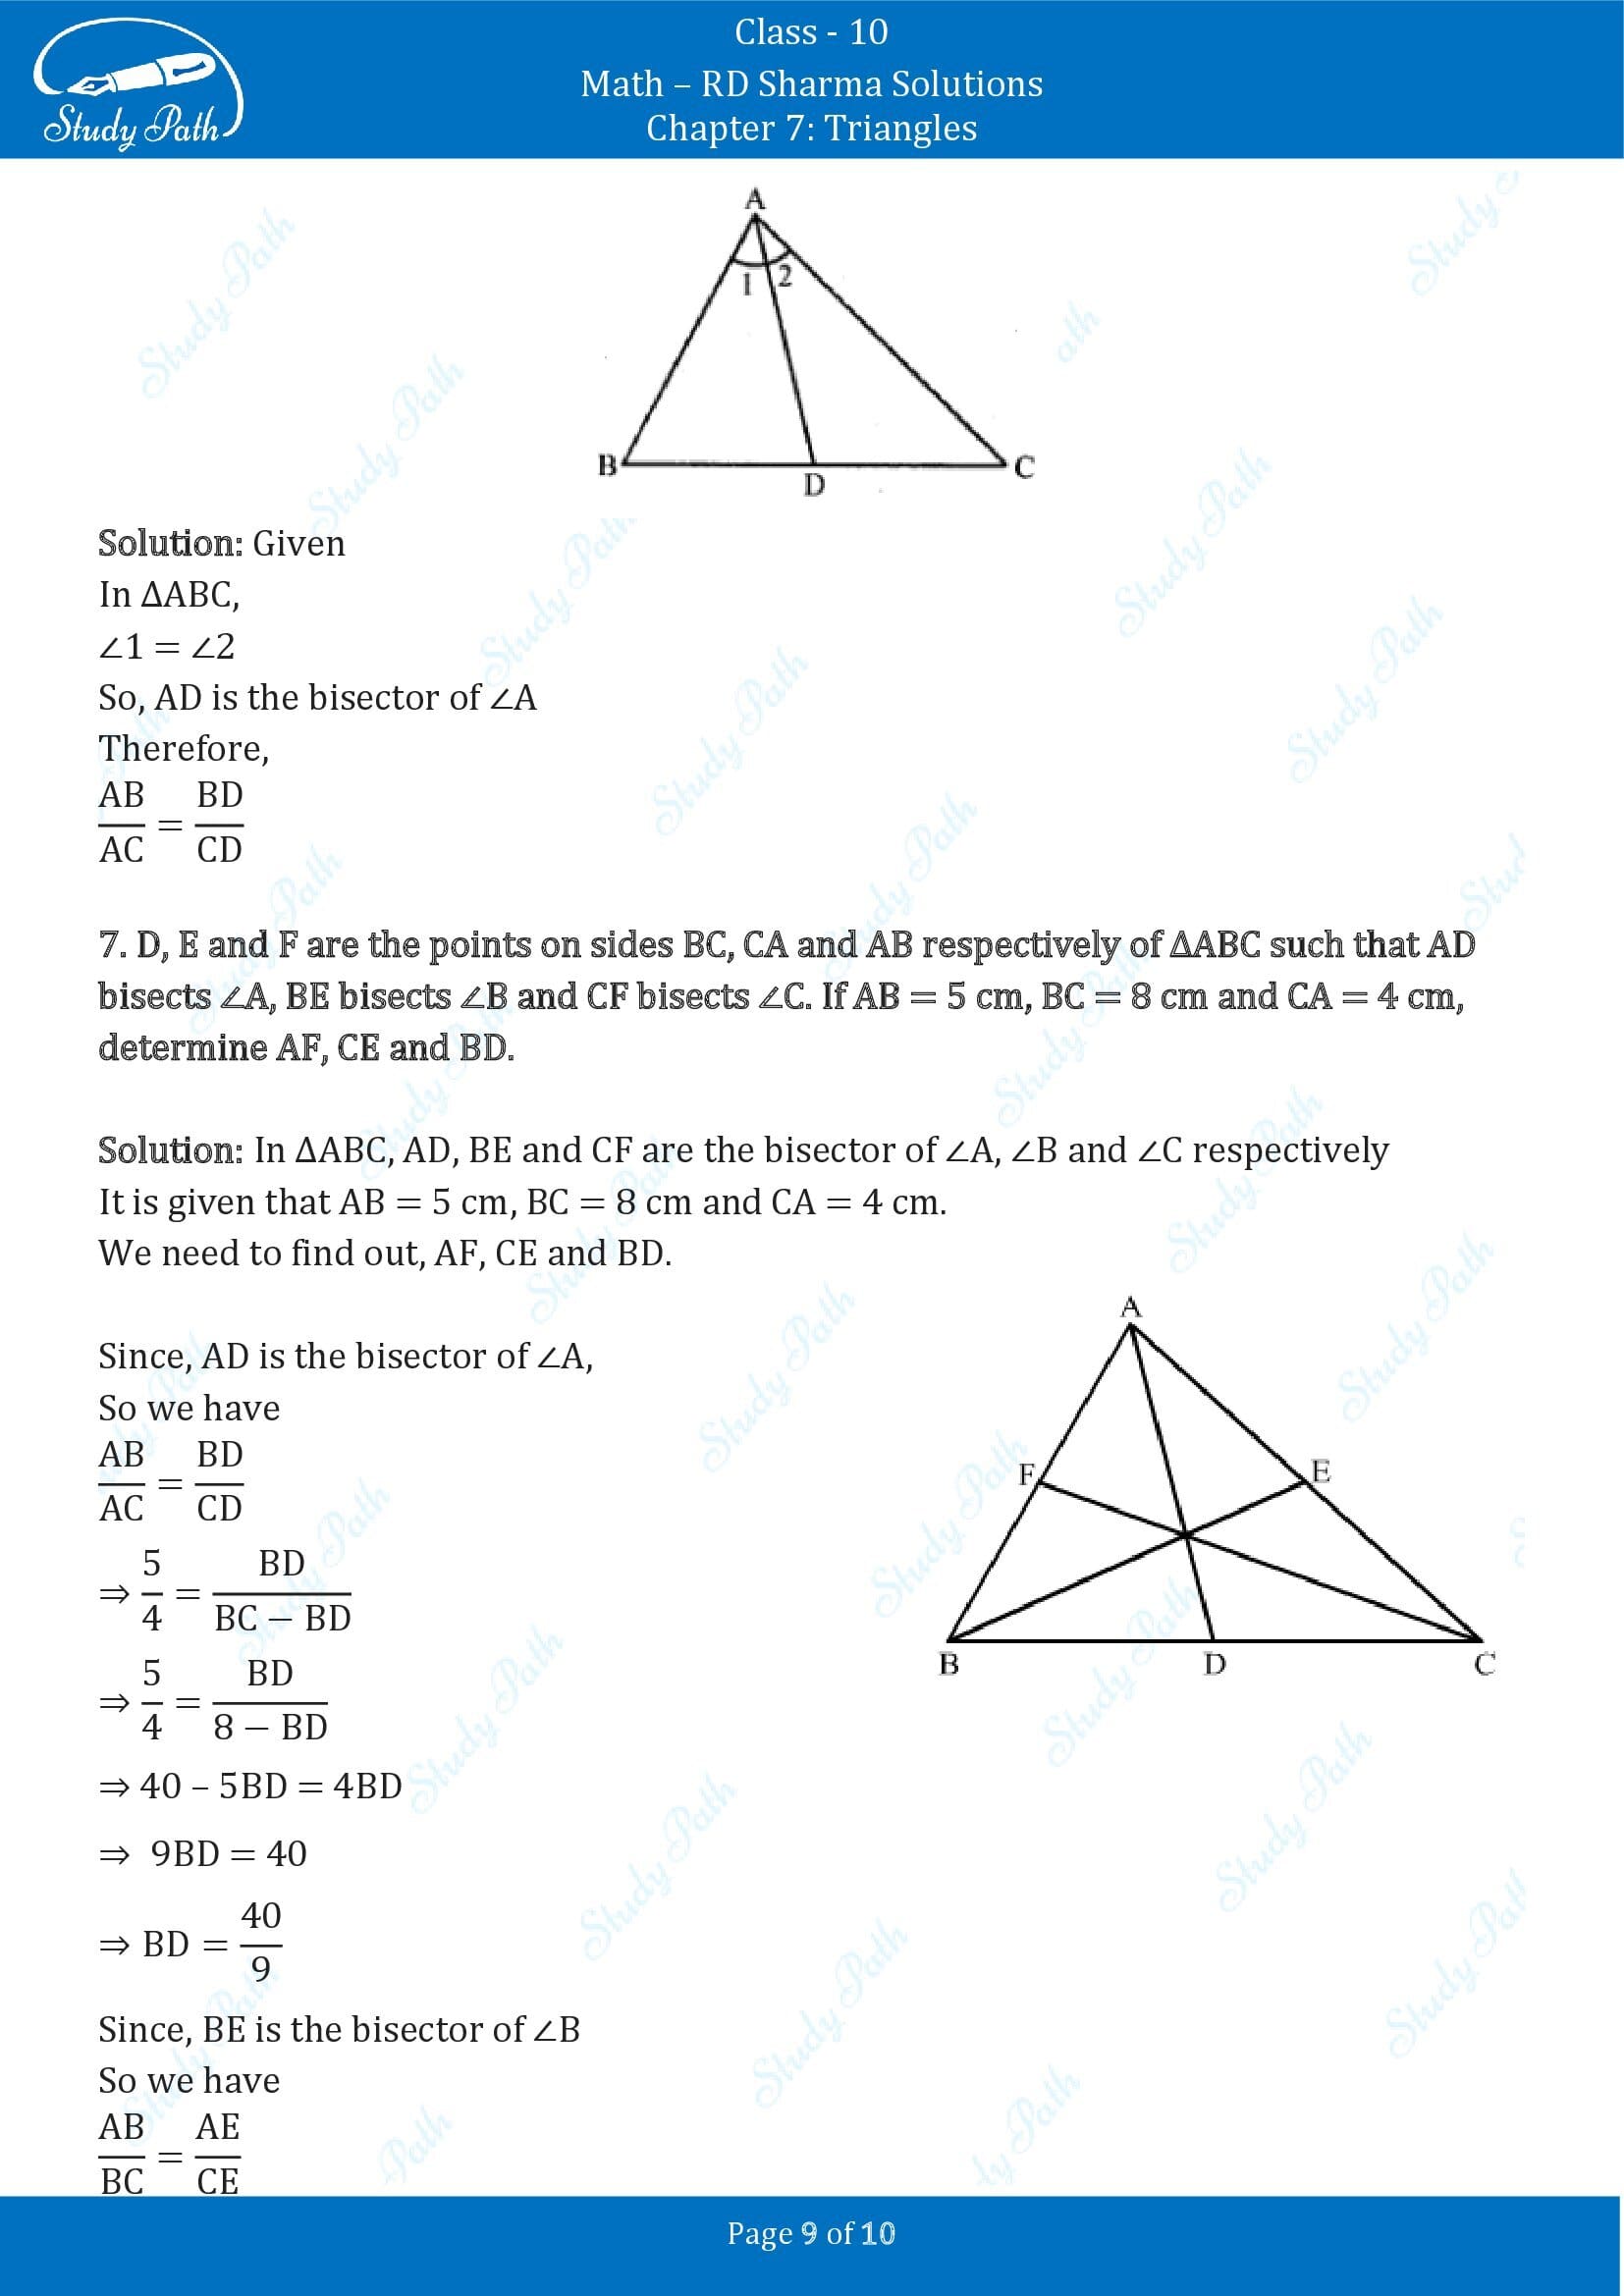 RD Sharma Solutions Class 10 Chapter 7 Triangles Exercise 7.3 00009